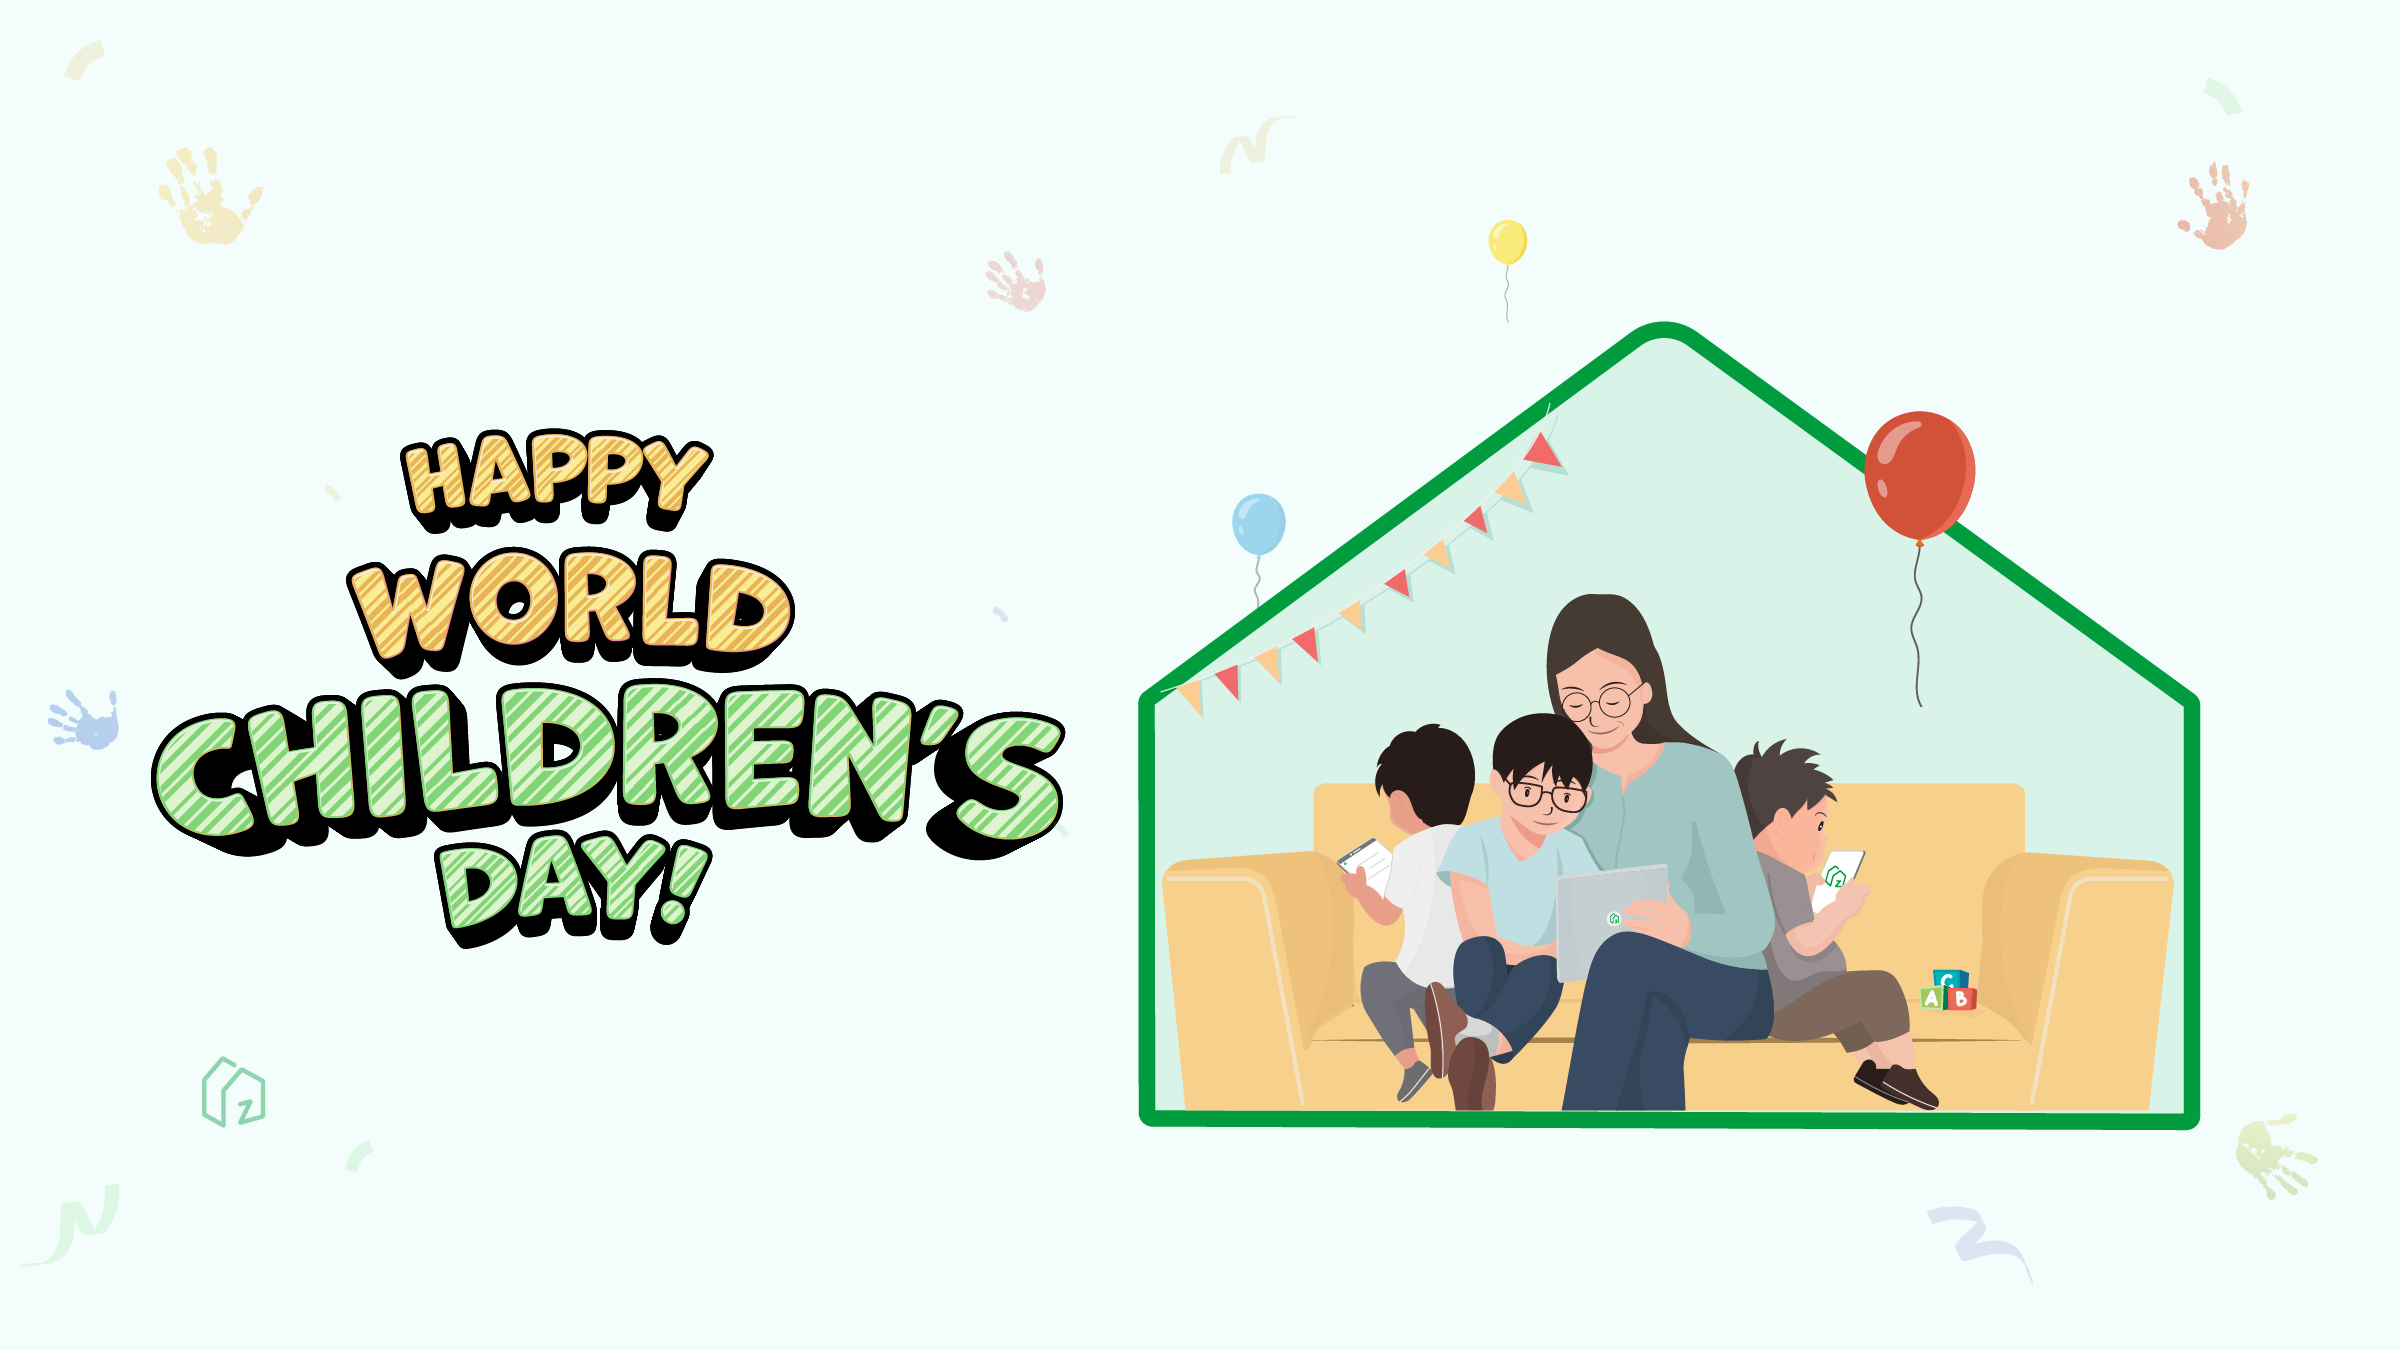 This Children's Day, make kids a part of your digital home.